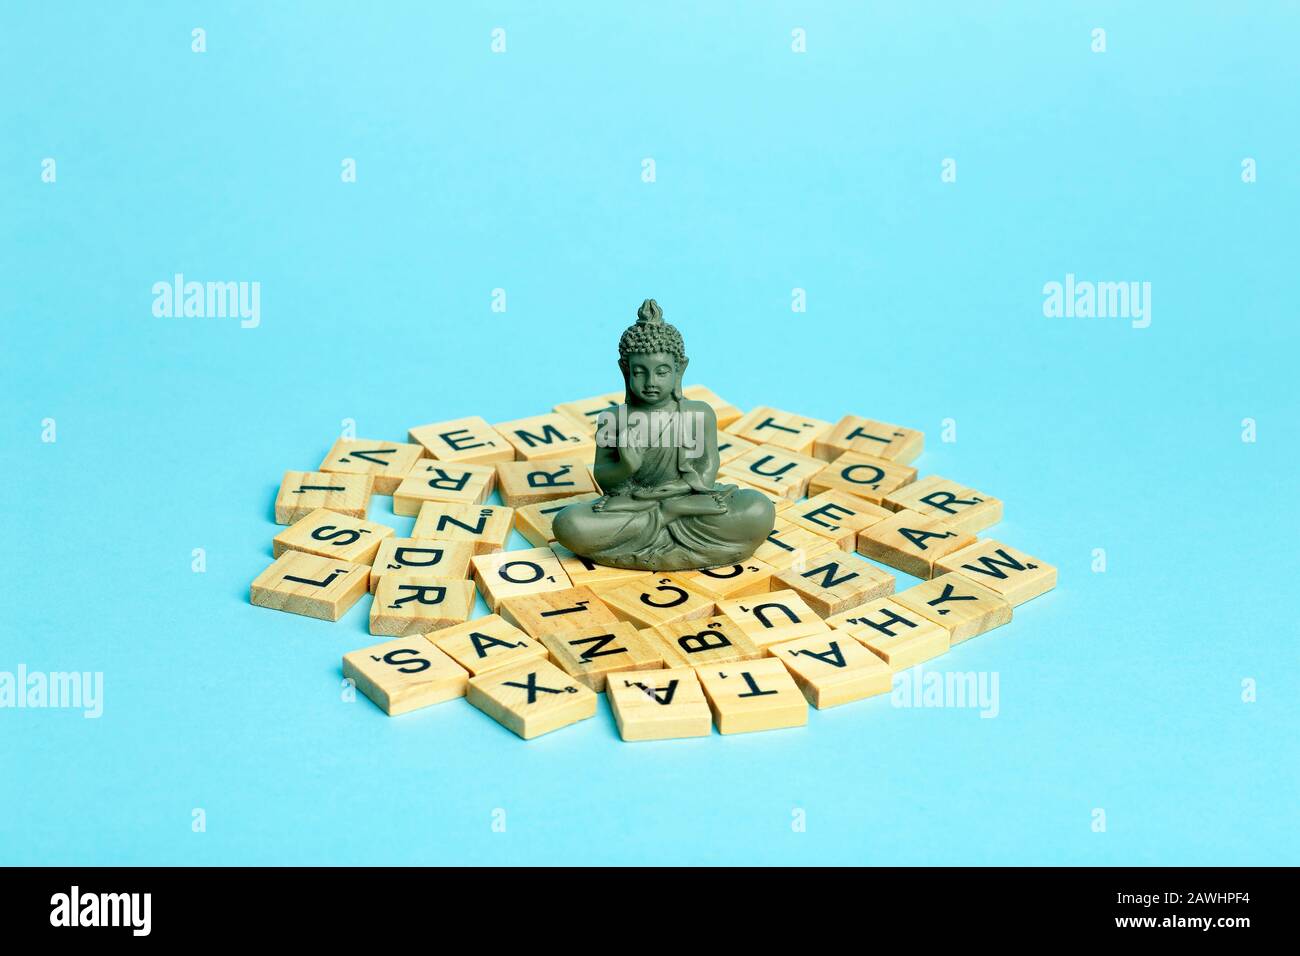 Mind concept. A meditating figure sits on a pile of different letters. The concept of thinking, mind, development and creativity. Stock Photo